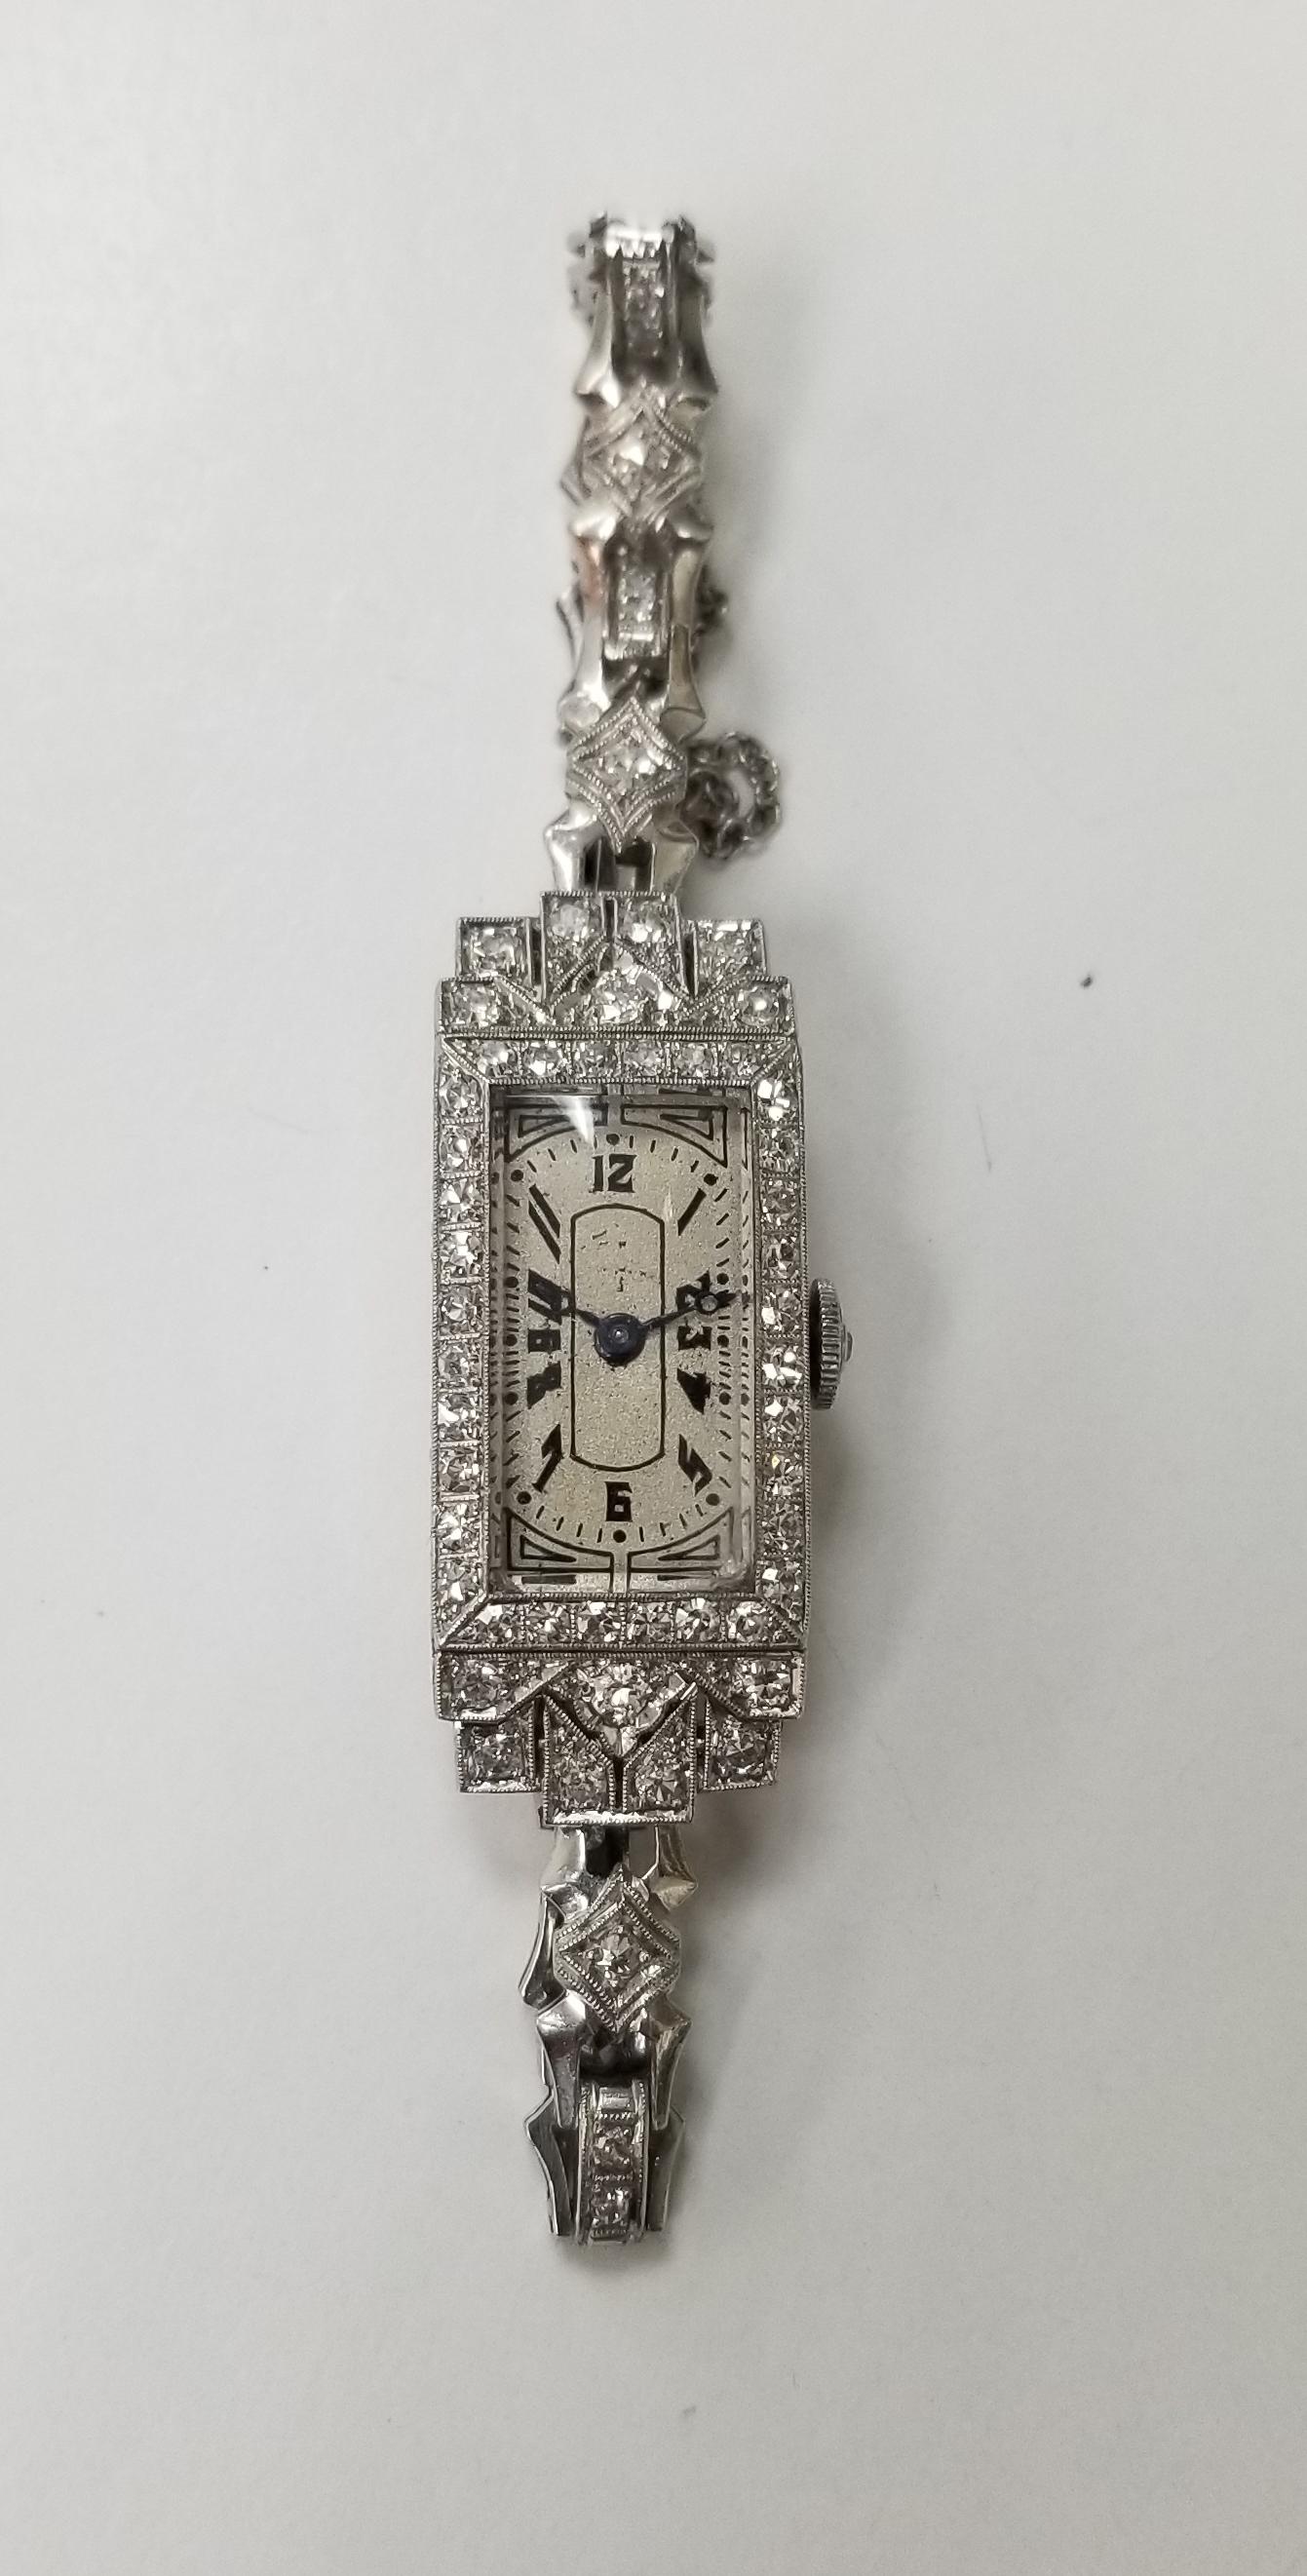 Vintage Art Deco Palladium diamond watch, containing 65 round single cut diamonds of very fine quality weighing approximately 1.50cts.  The watch is engraved from 1919.
Length is 6 1/4 inches with a safety chain